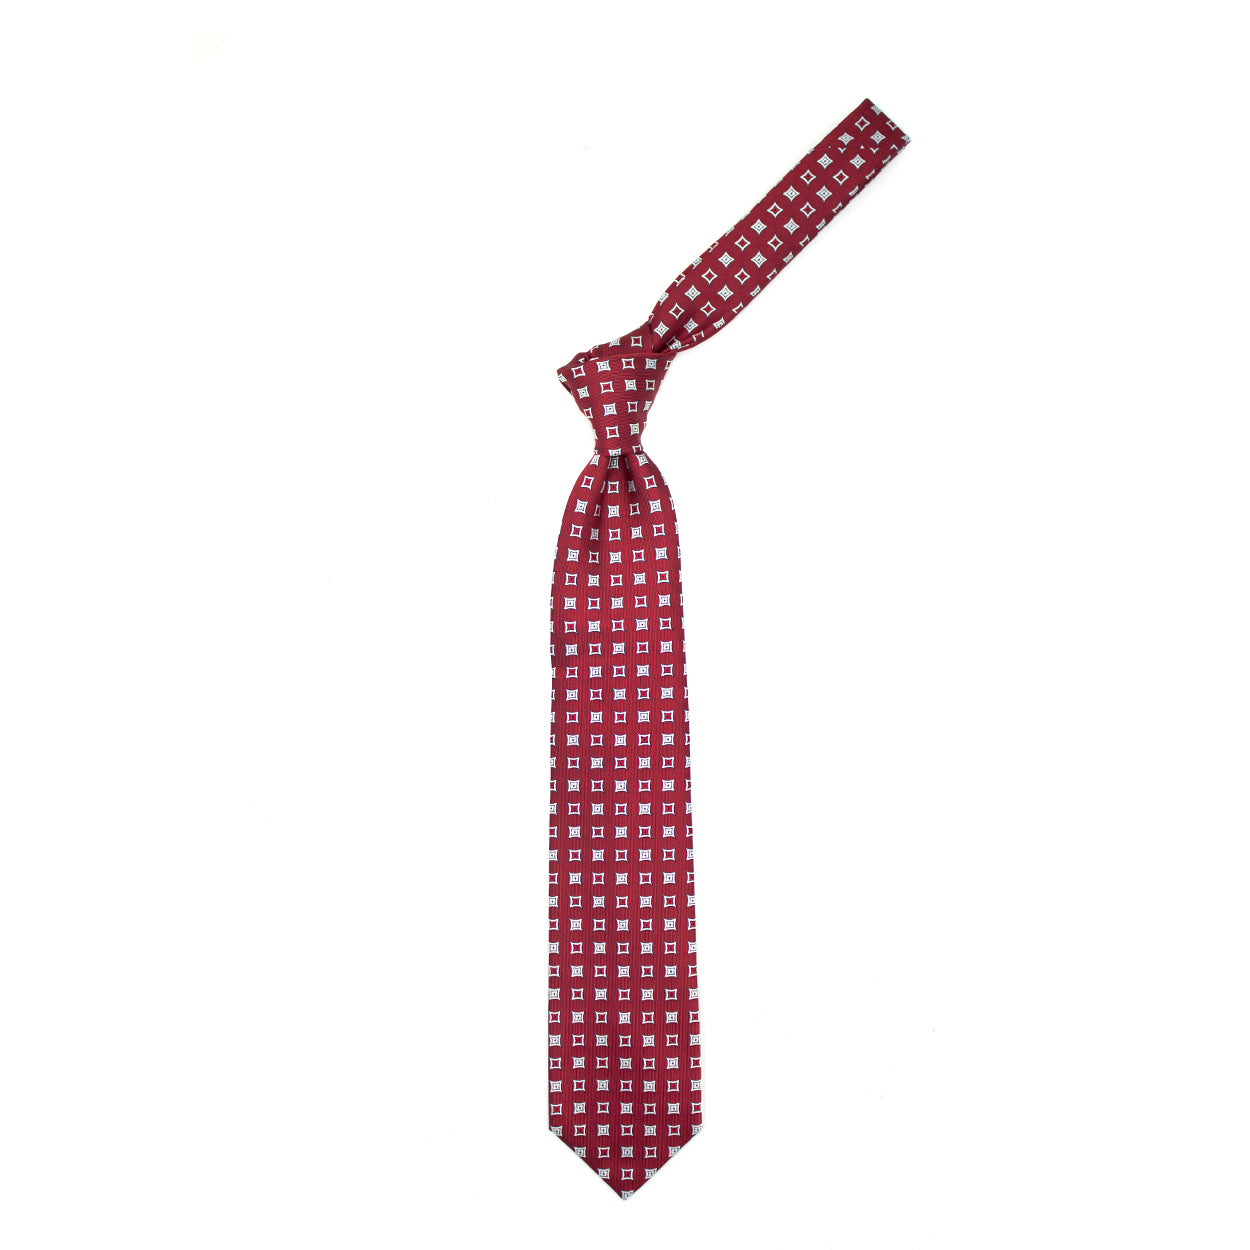 Red tie with white squares